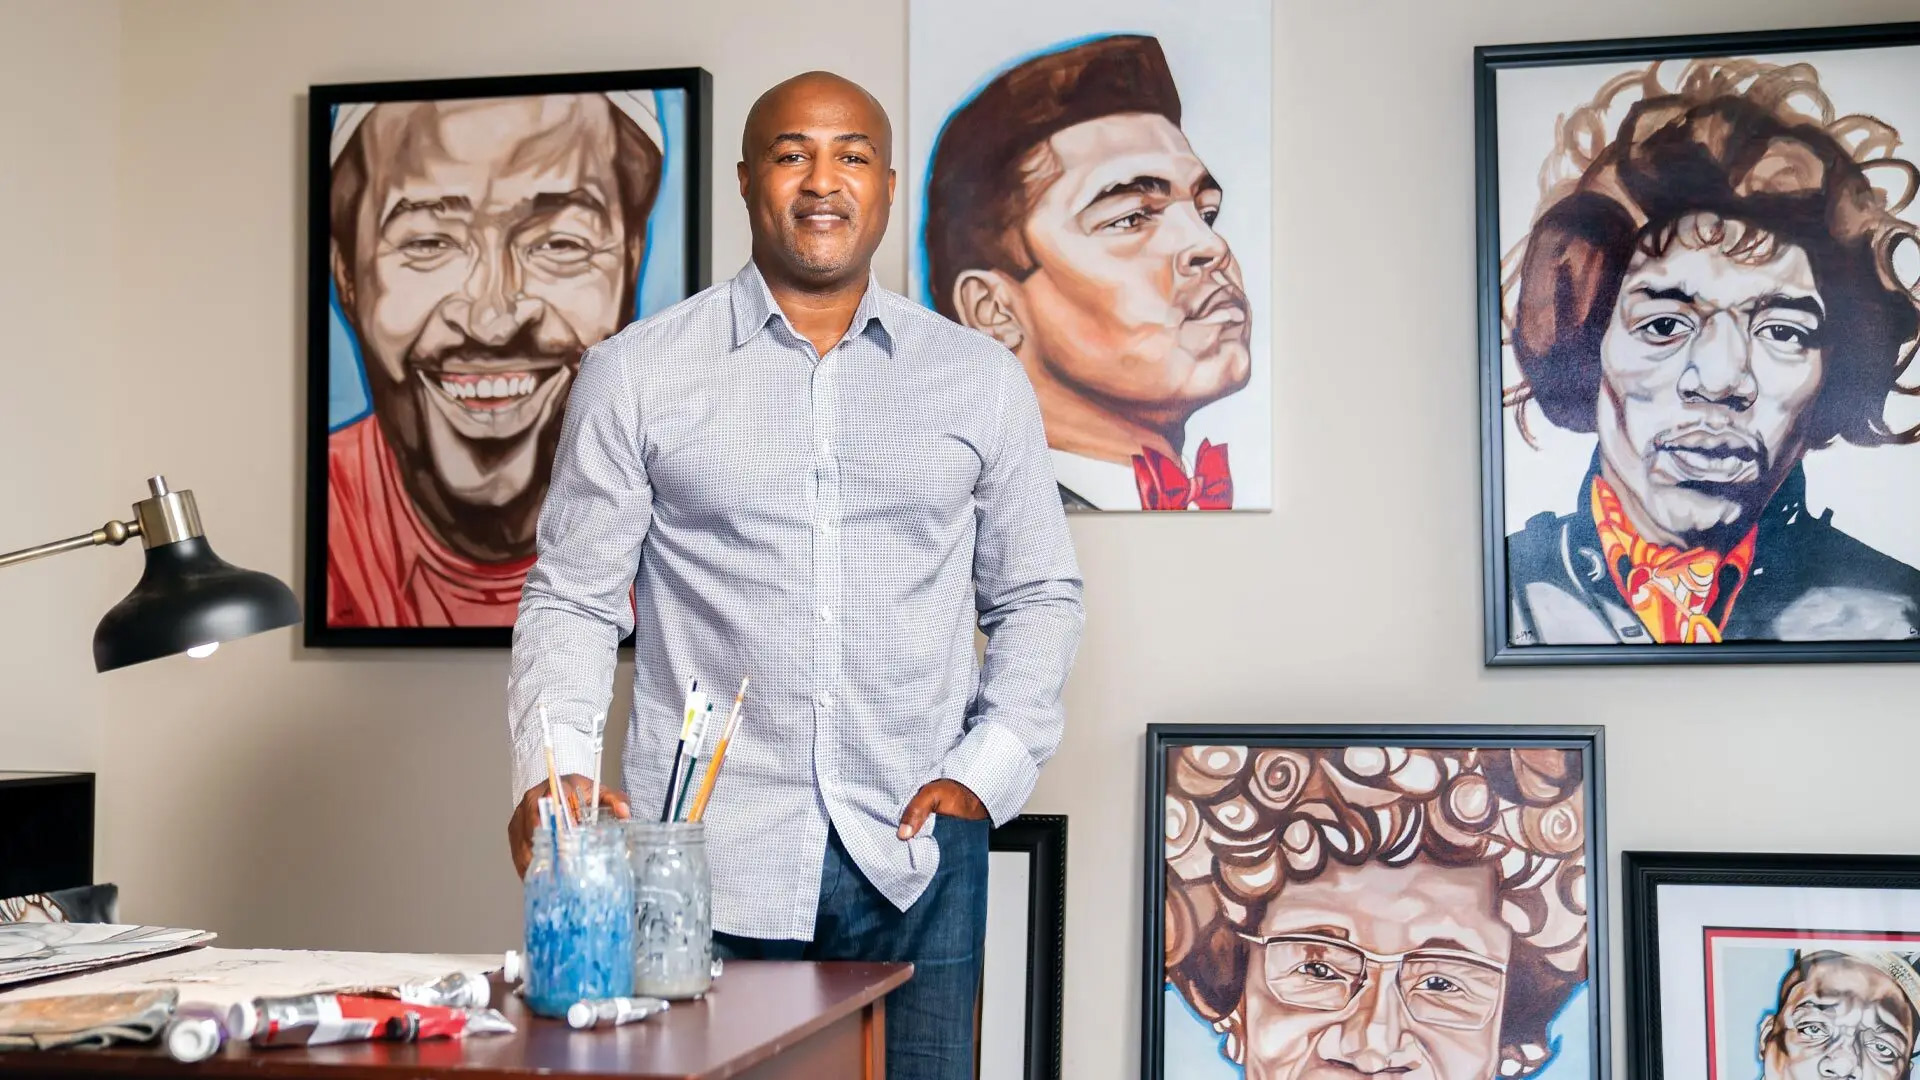 Artist and former Terps football player Lynde Washington '99 poses with a few of the oil paintings he's created over the years, often focusing on African American athletic and cultural luminaries. Photo by Ryan Donnell.